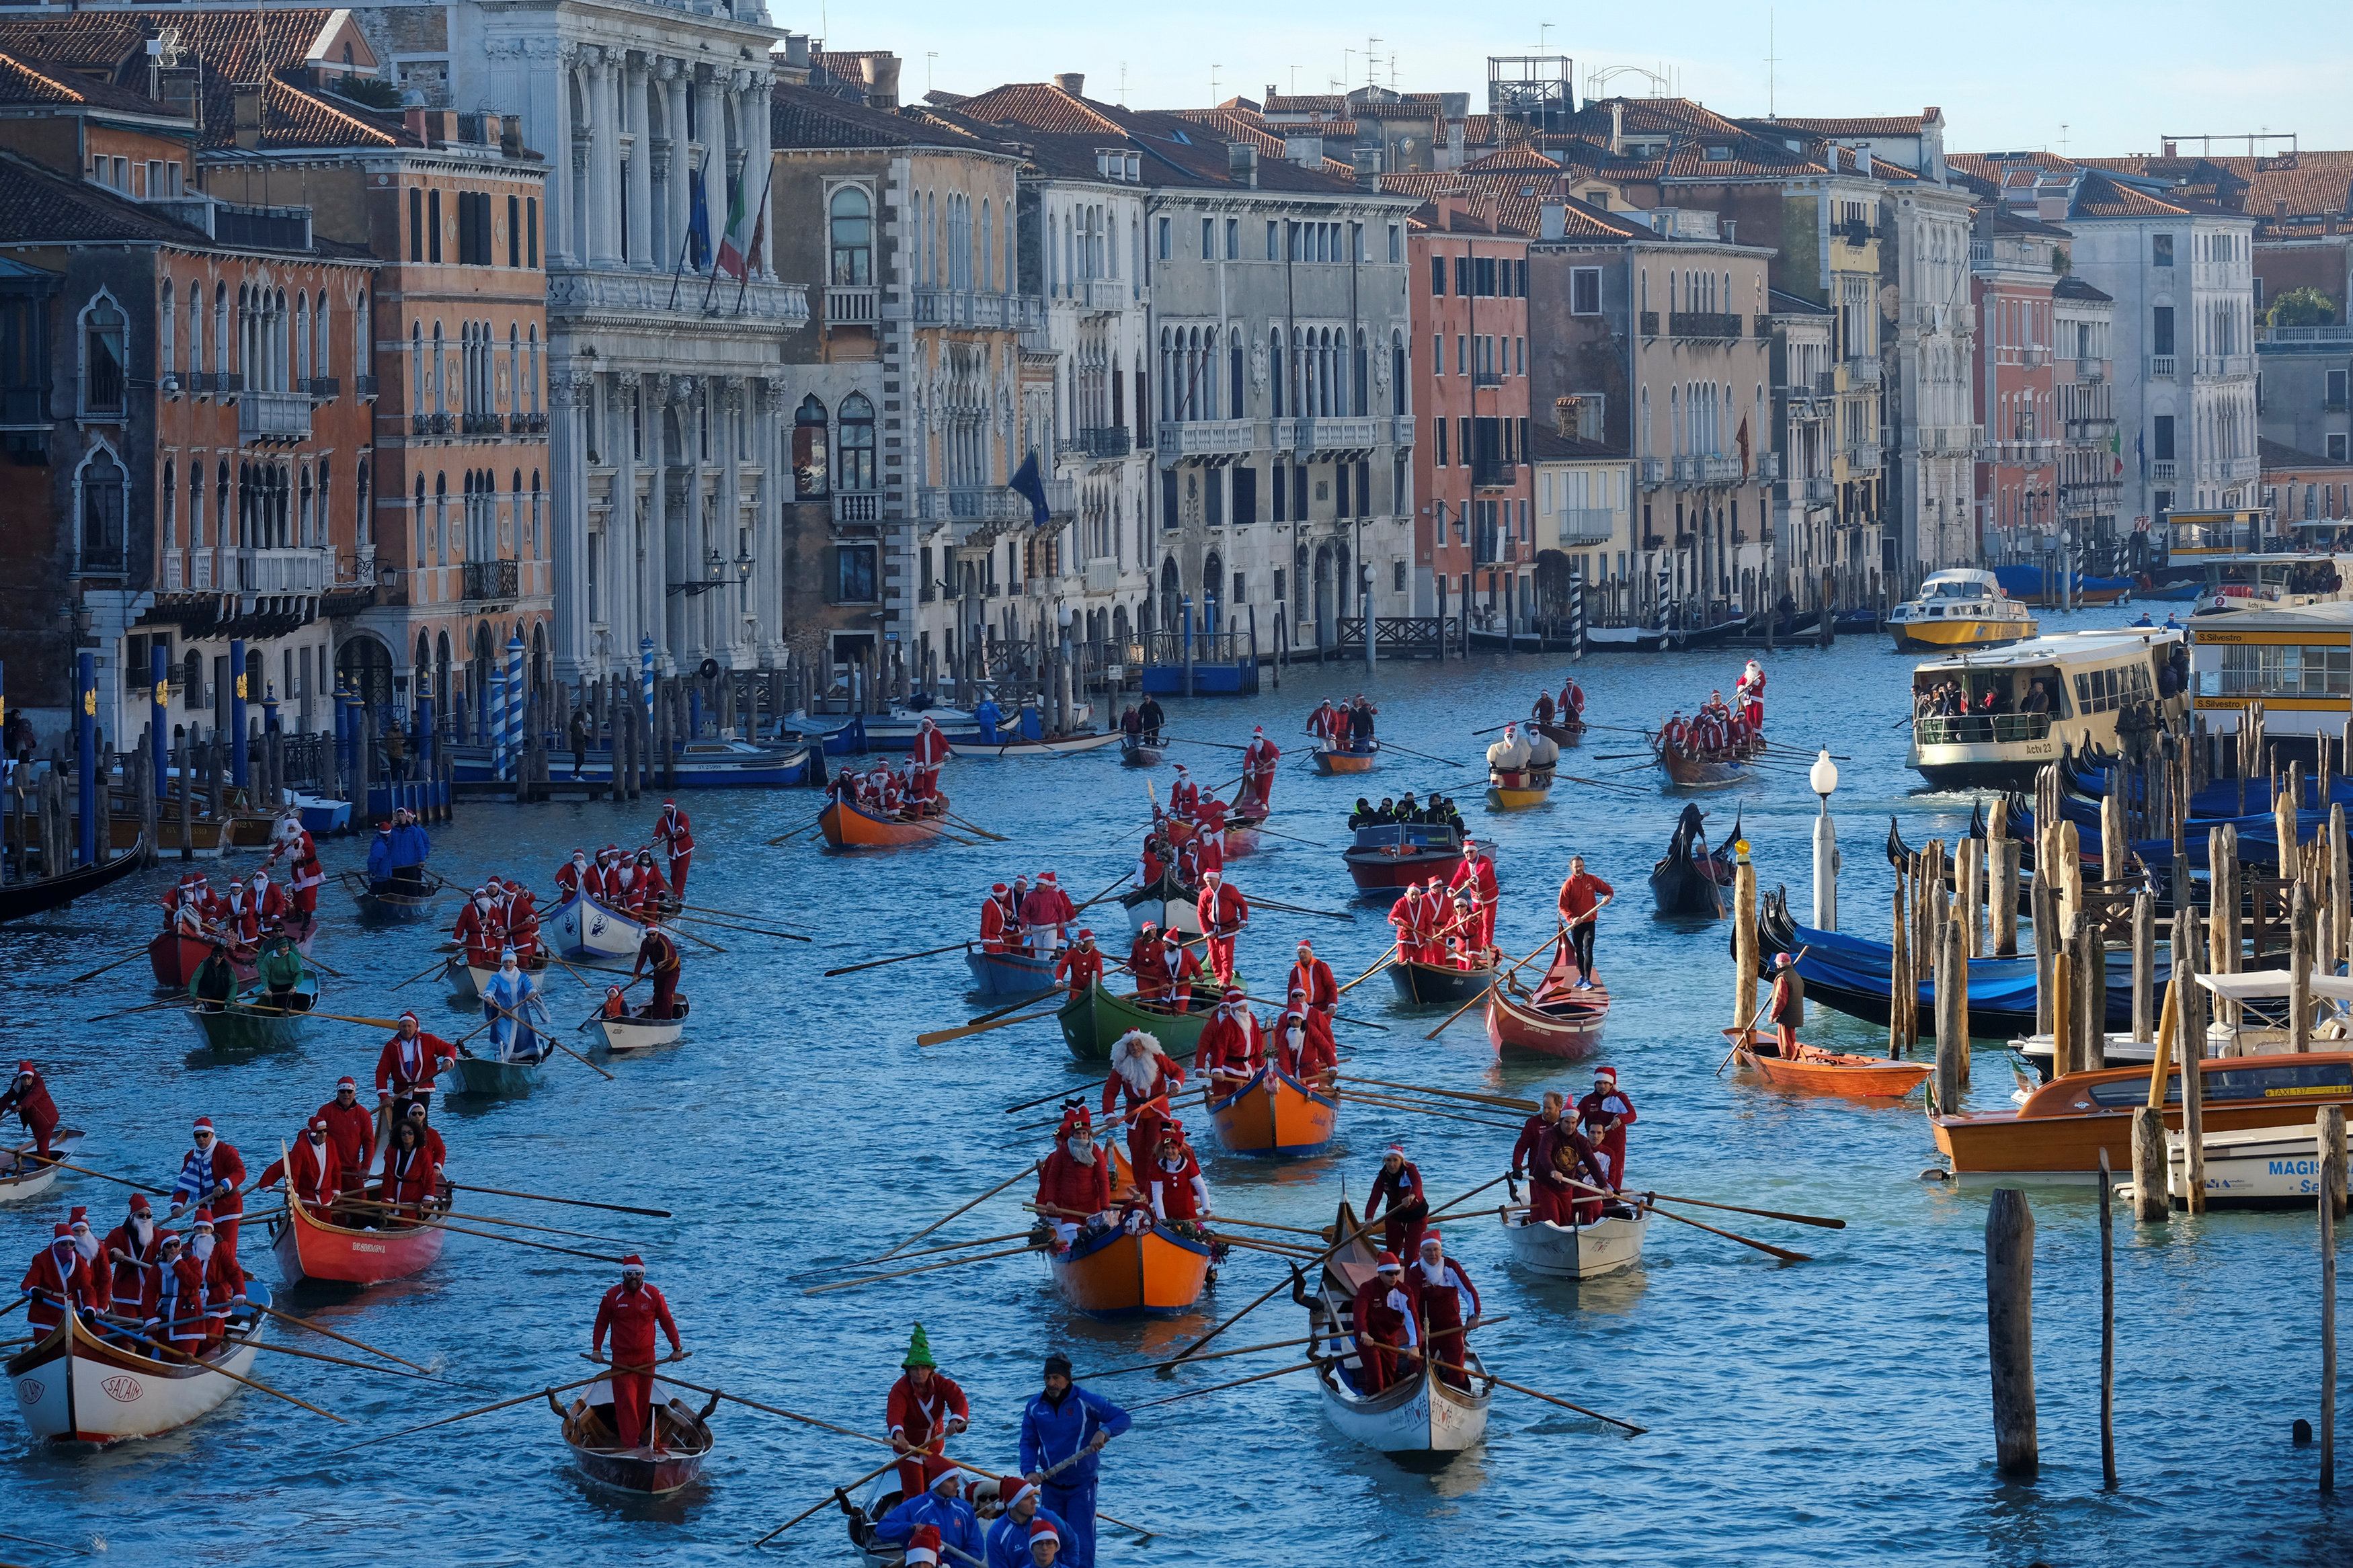 Boating Santas race in Venice's Grand Canal